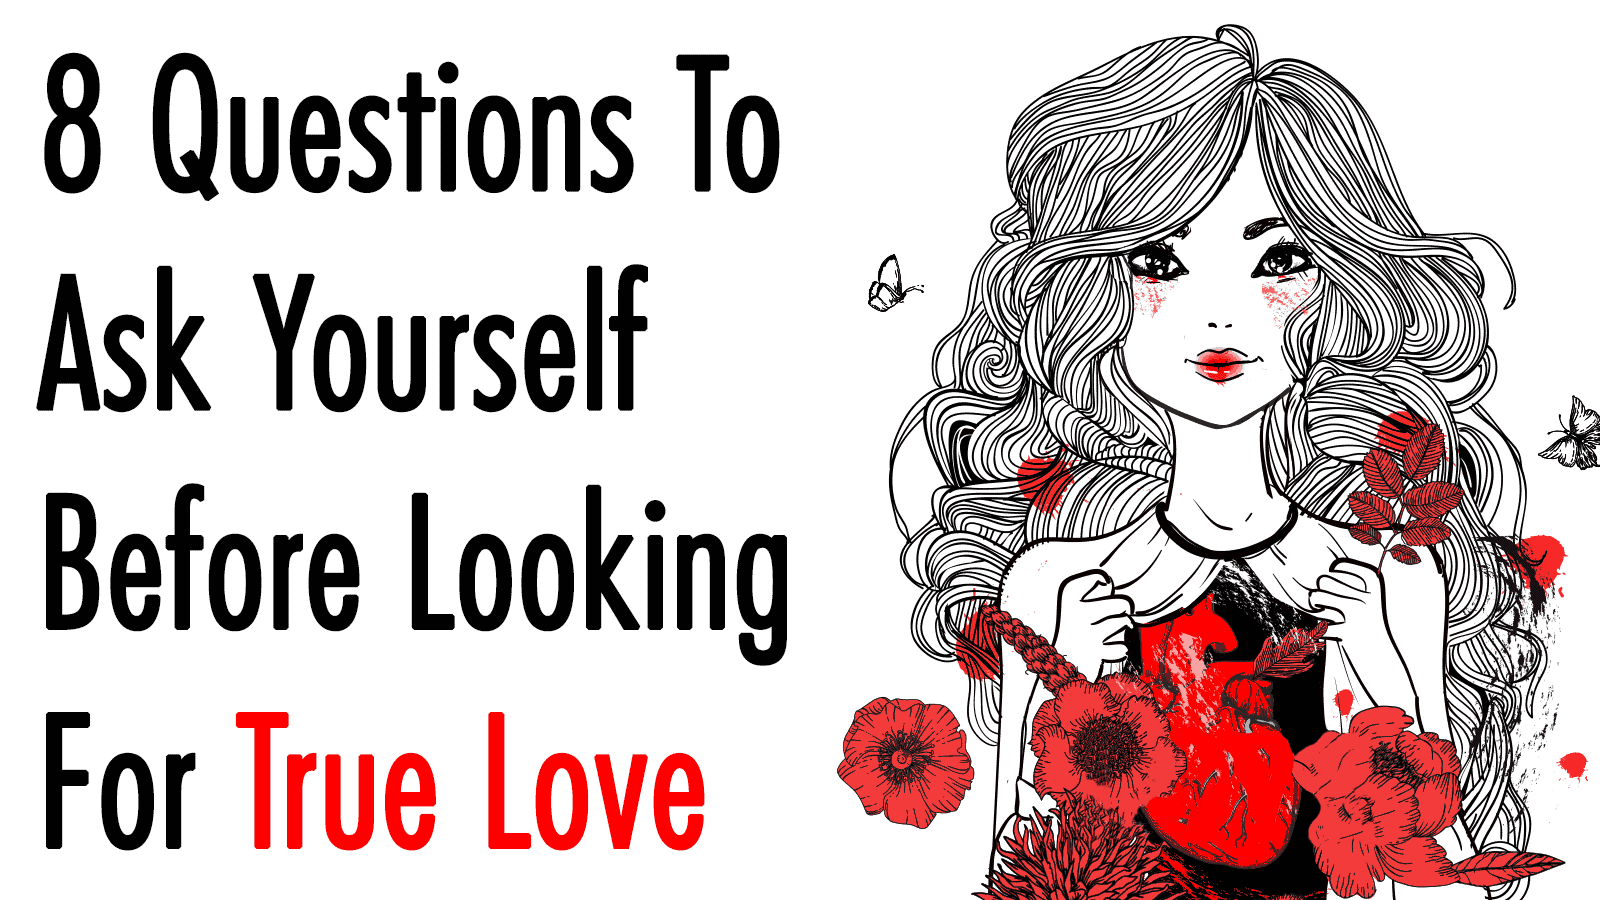 8 Questions To Ask Yourself Before Looking For True Love